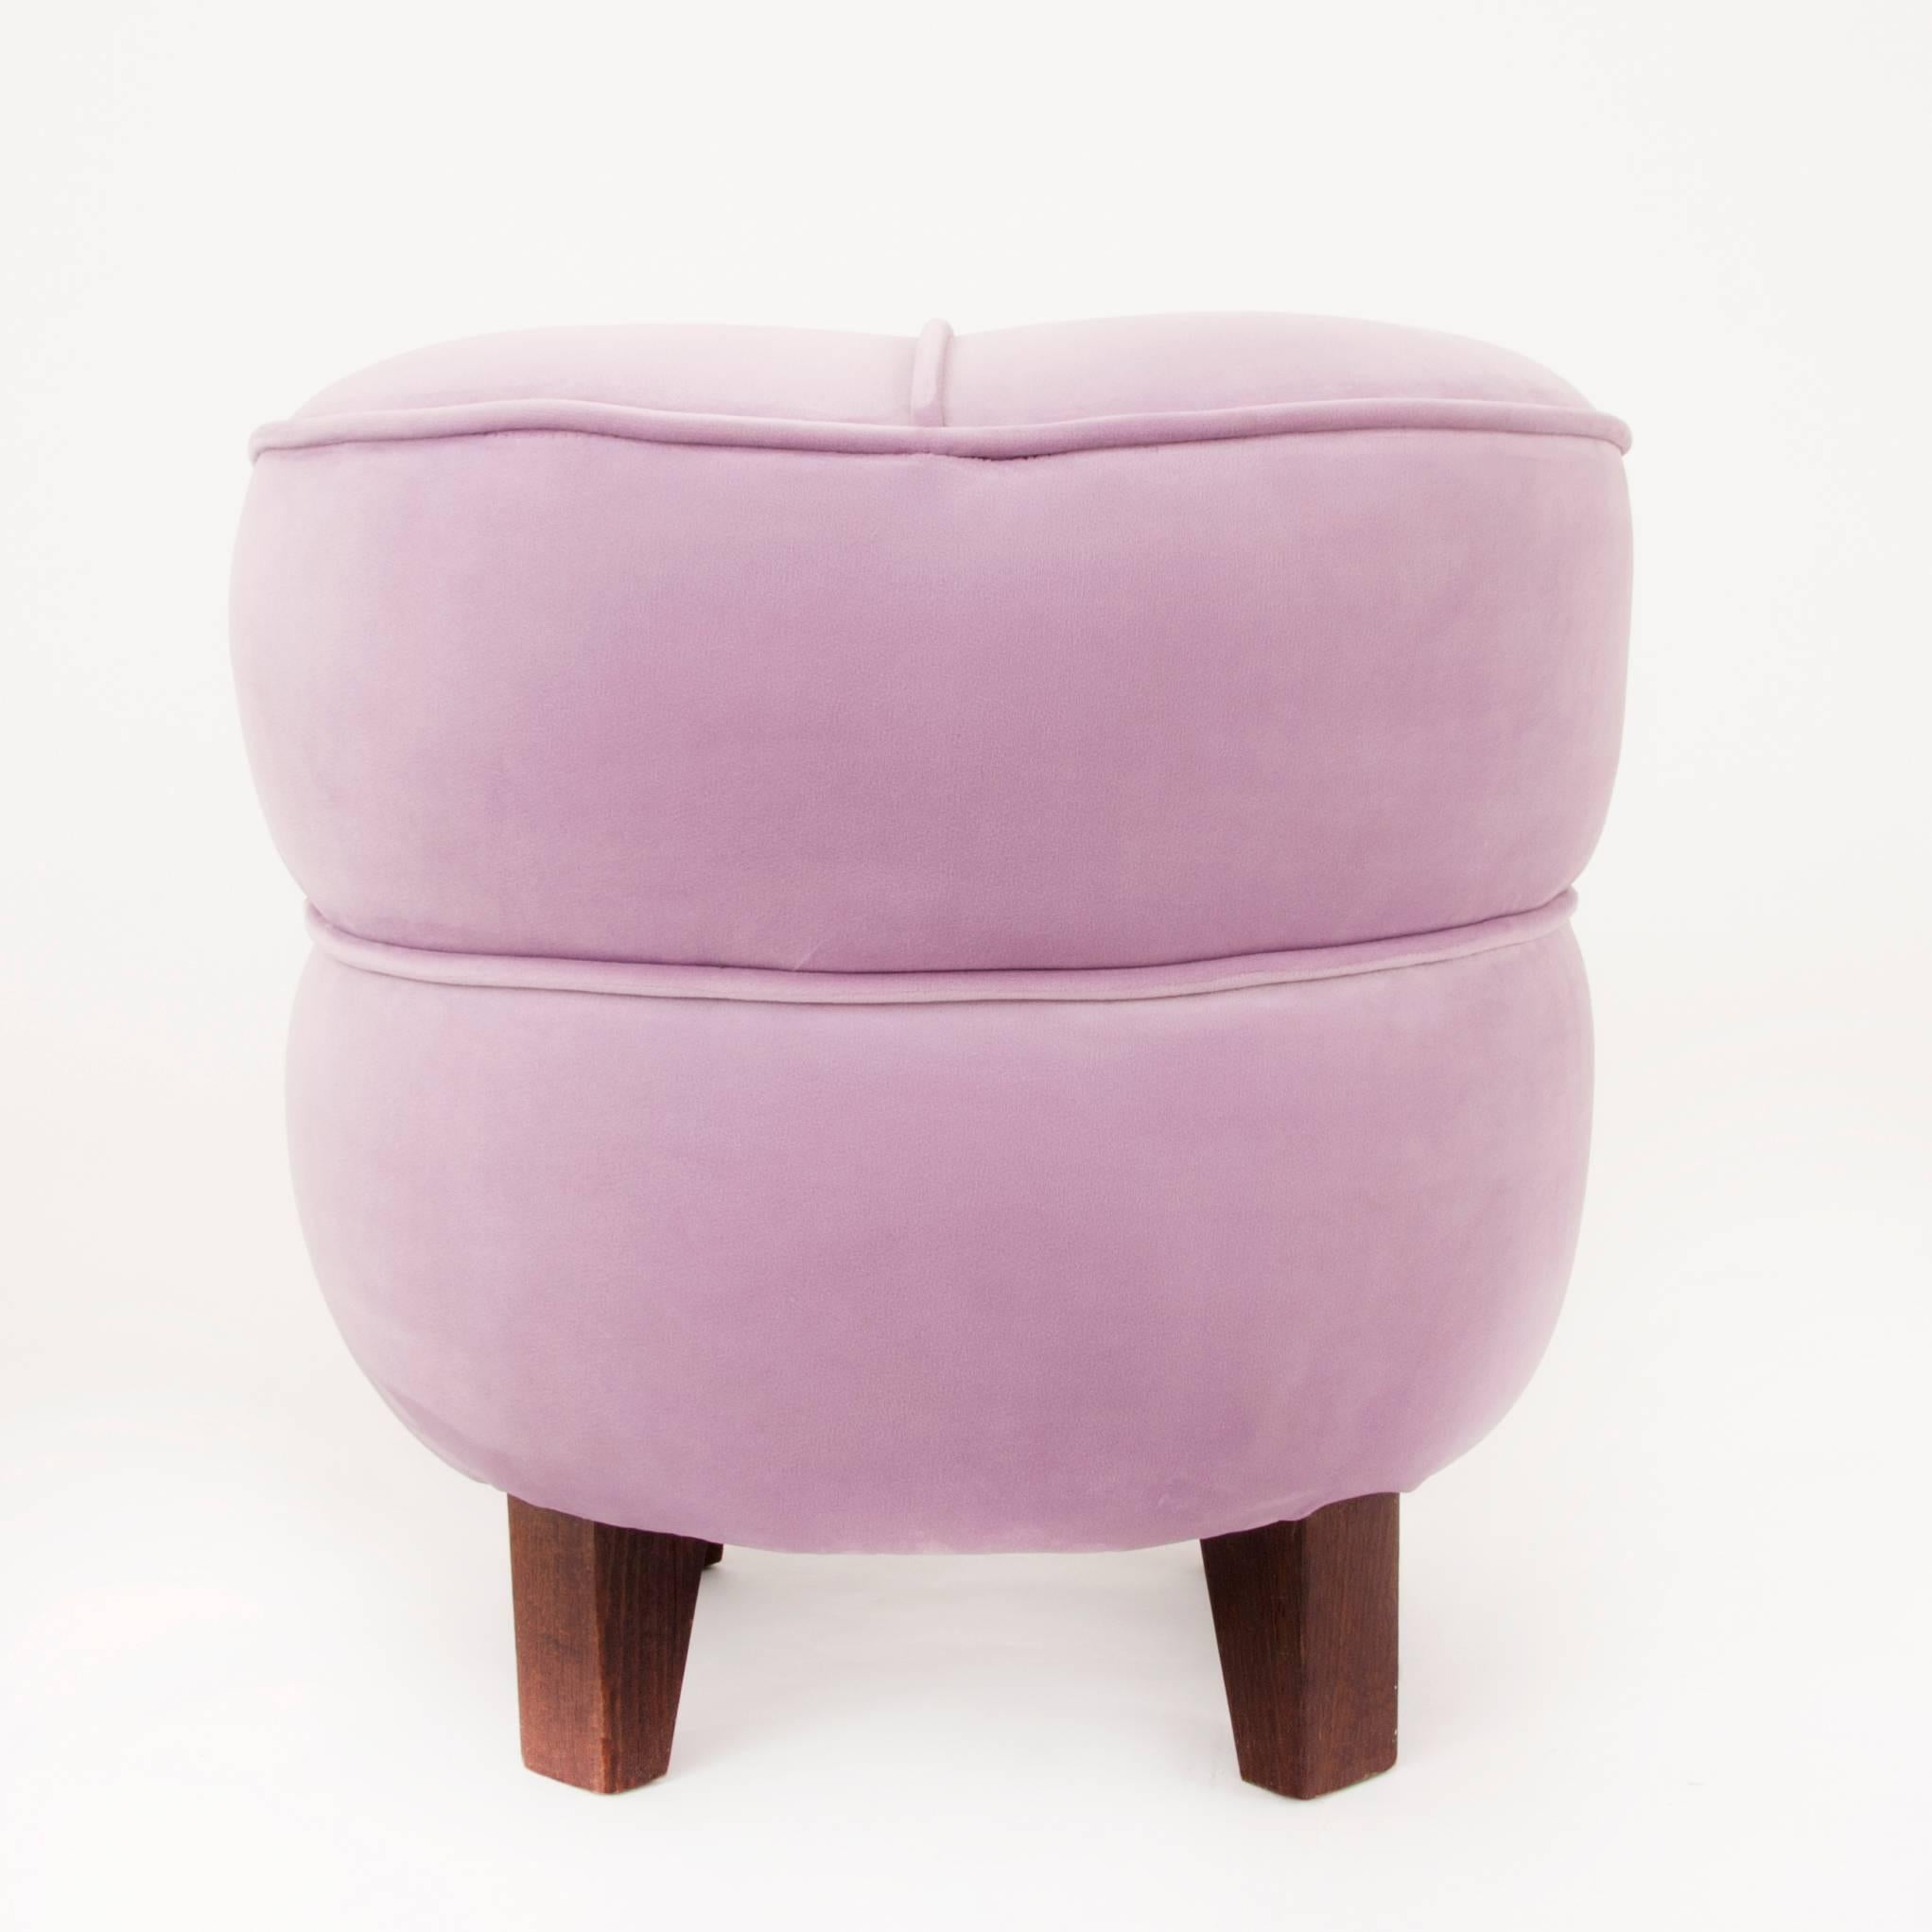 A charming Art Deco stool or pouf from the 1930s, designed by Jindrich Halabala in former Czechoslovakia. A lovely piece of furniture, carefully restored, in excellent condition, got new upholstery from high-quality rosé velvet fabric.